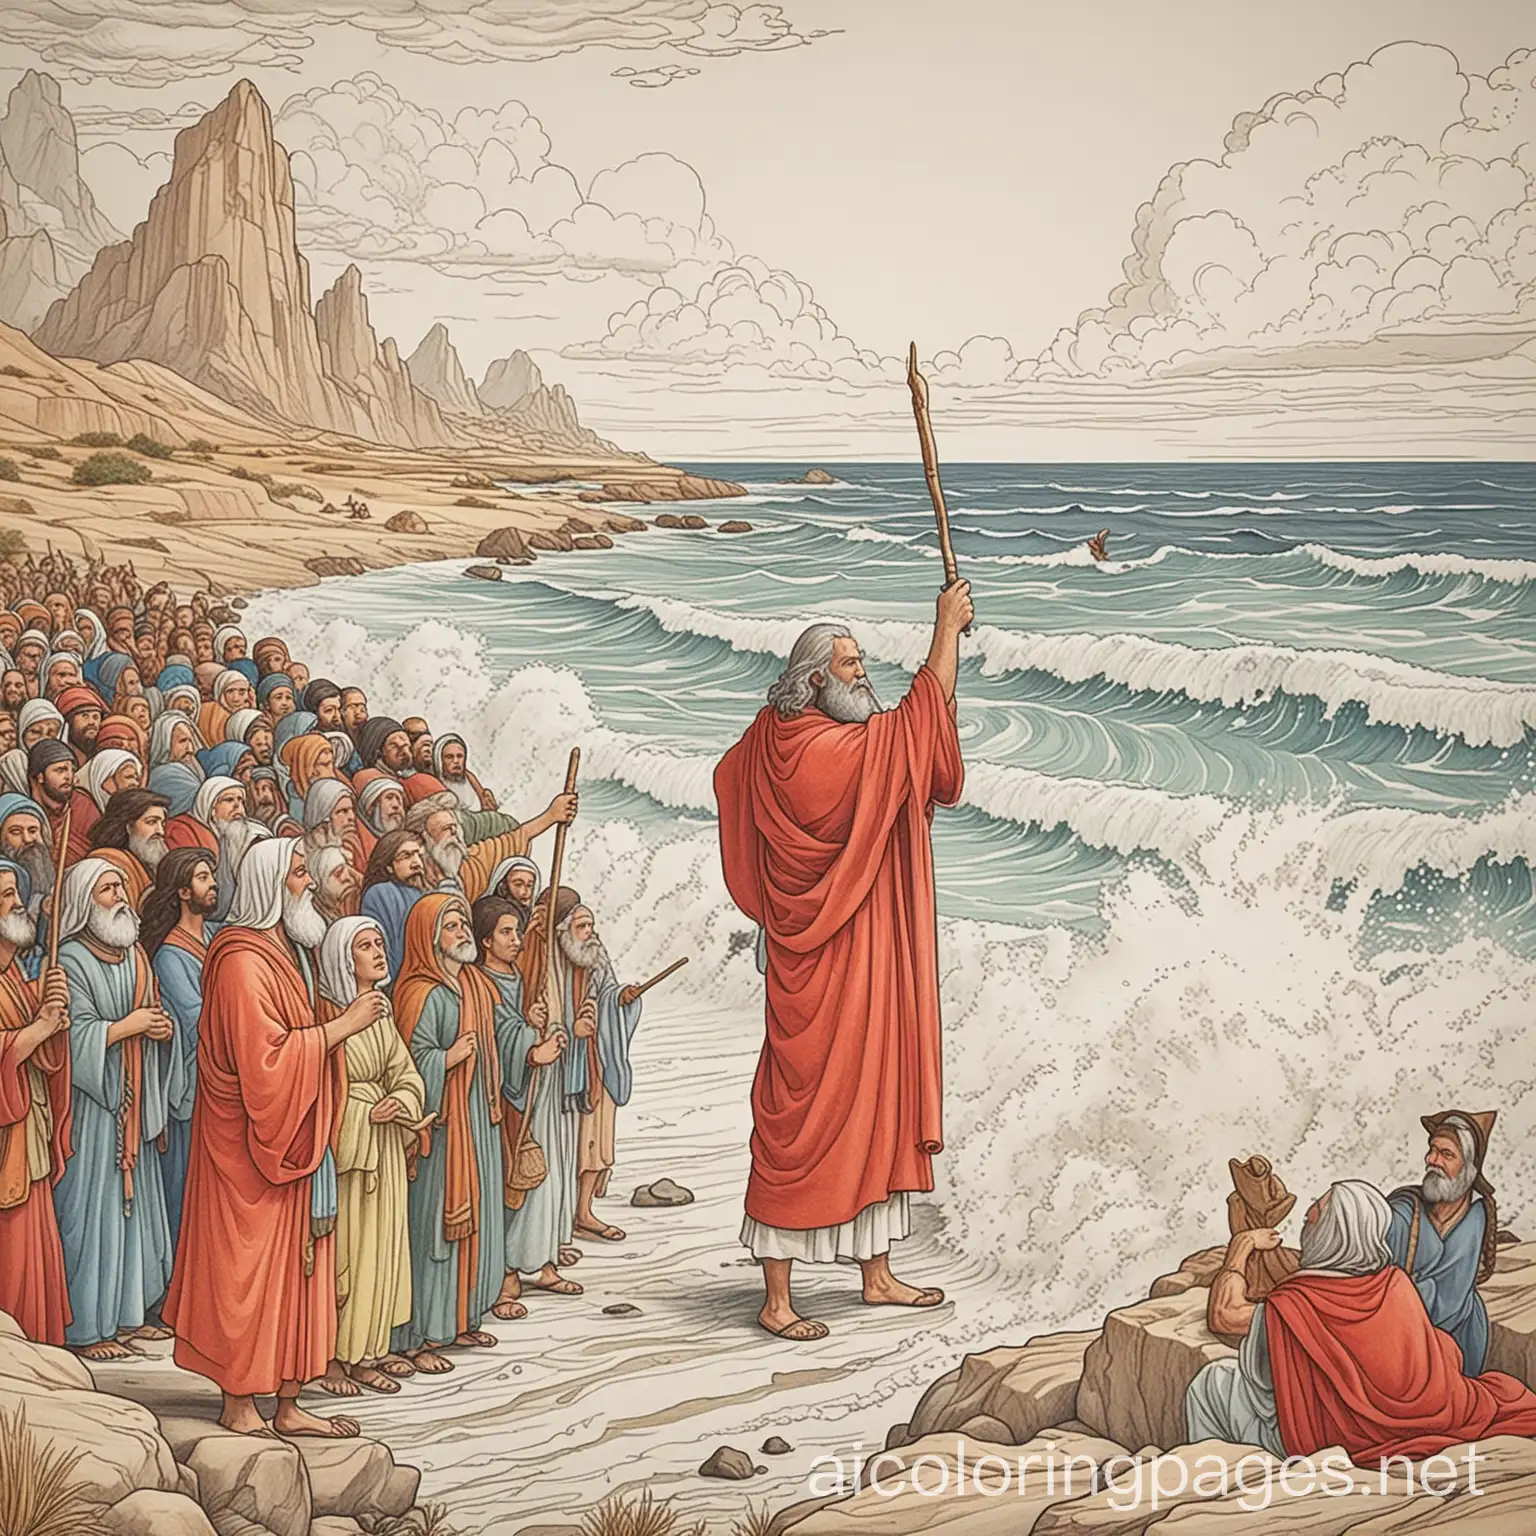 Title: Moses Parting the Red Sea Background: Start with a wide, horizontally oriented page. The background should depict a large body of water (the Red Sea), with waves and possibly some small boats or people in the distance. Moses: Draw Moses prominently in the center of the page. He should be an older man with a long beard, wearing traditional ancient robes, and holding a staff or rod extended towards the sea. Miracle Scene: Between Moses and the sea, draw a visible line where the waters are parting. You can show the waters as they begin to split apart, creating two walls of water on either side of Moses. add the Israelites on the shore, watching in awe as the sea begins to part. They could be men, women, and children, each with expressions of wonder and amazement. Nature Elements: Include elements like birds flying overhead, fish swimming in the waters, and possibly clouds in the sky to give depth to the scene. Coloring Details: Leave ample space for coloring. Use bold, clear lines for the main figures and elements, ensuring that it's easy to color within the lines., Coloring Page, black and white, line art, white background, Simplicity, Ample White Space. The background of the coloring page is plain white to make it easy for young children to color within the lines. The outlines of all the subjects are easy to distinguish, making it simple for kids to color without too much difficulty